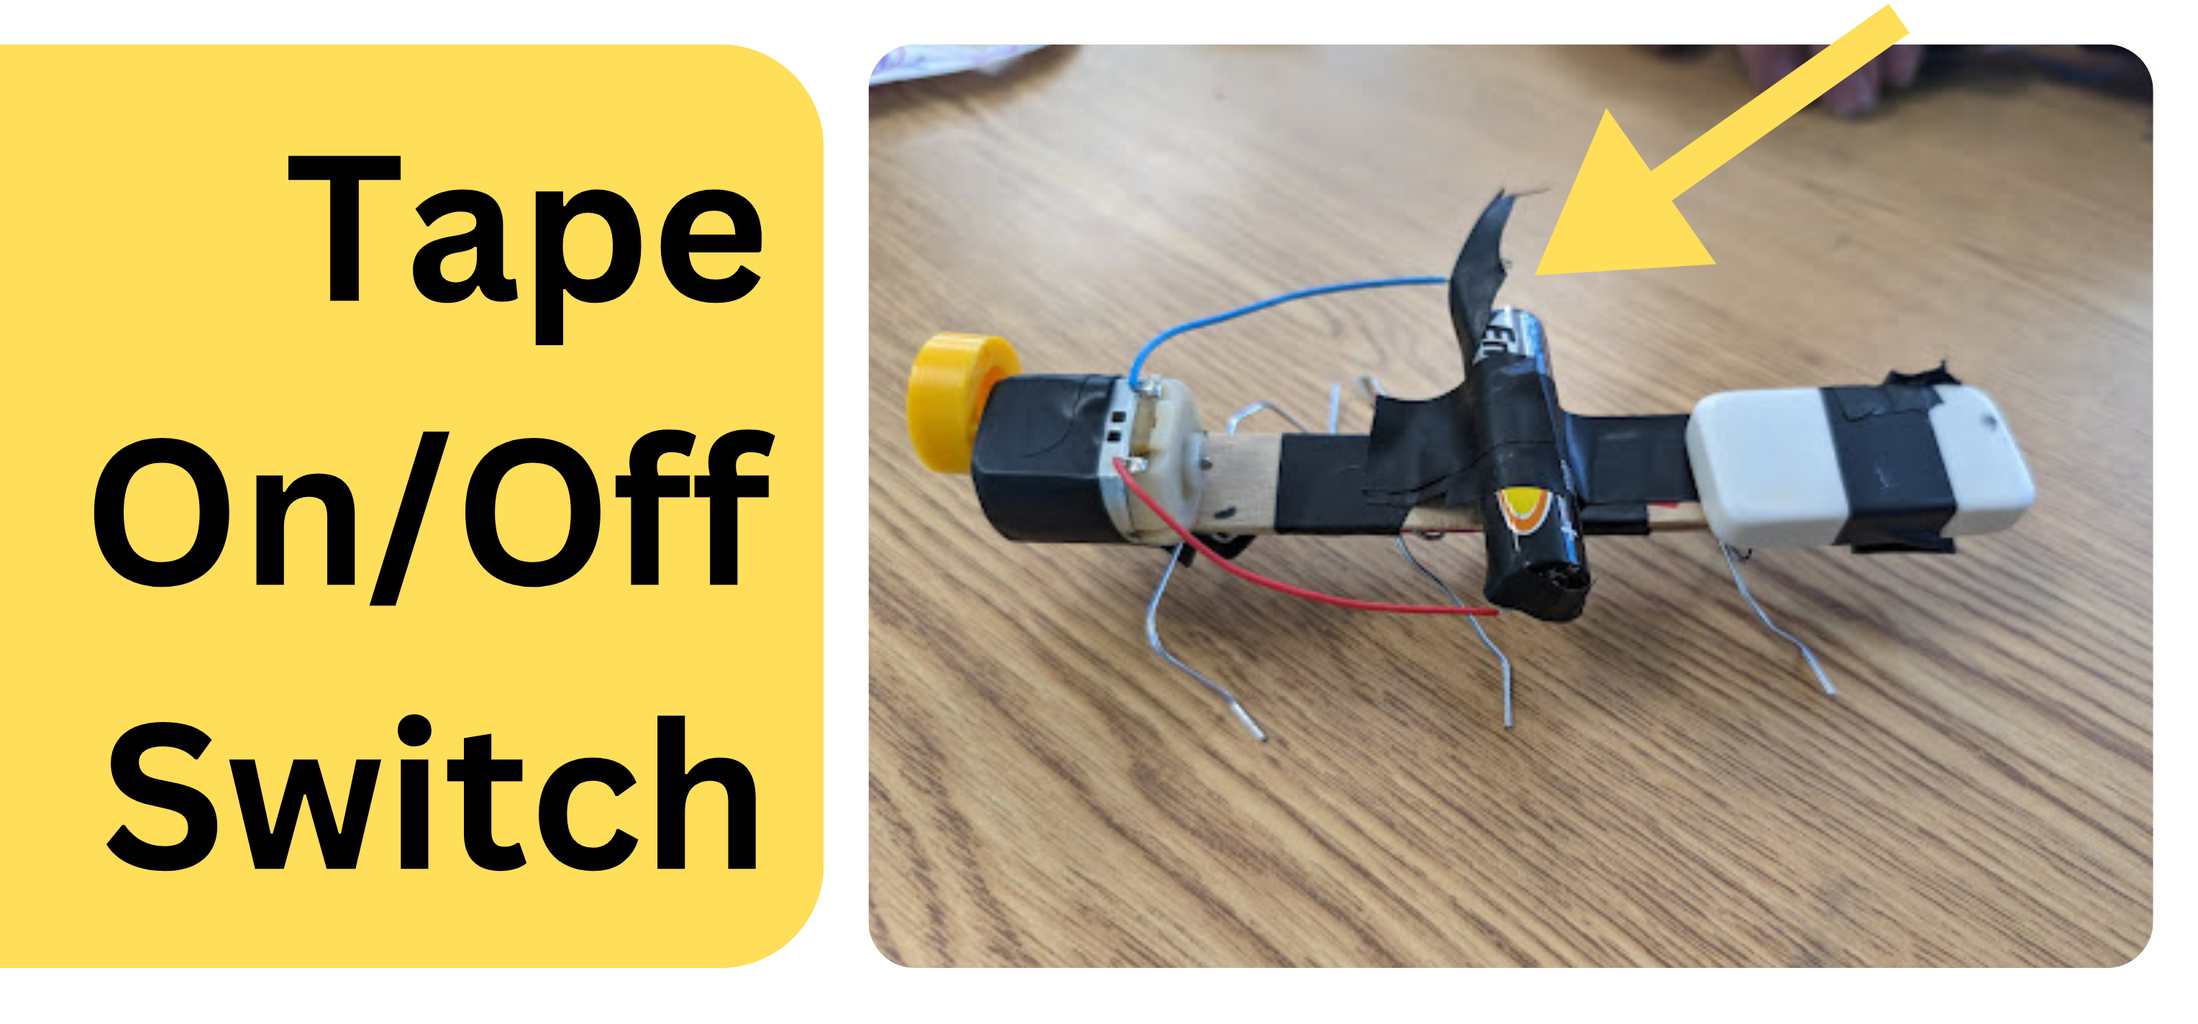 Attach Battery to Body and Motor